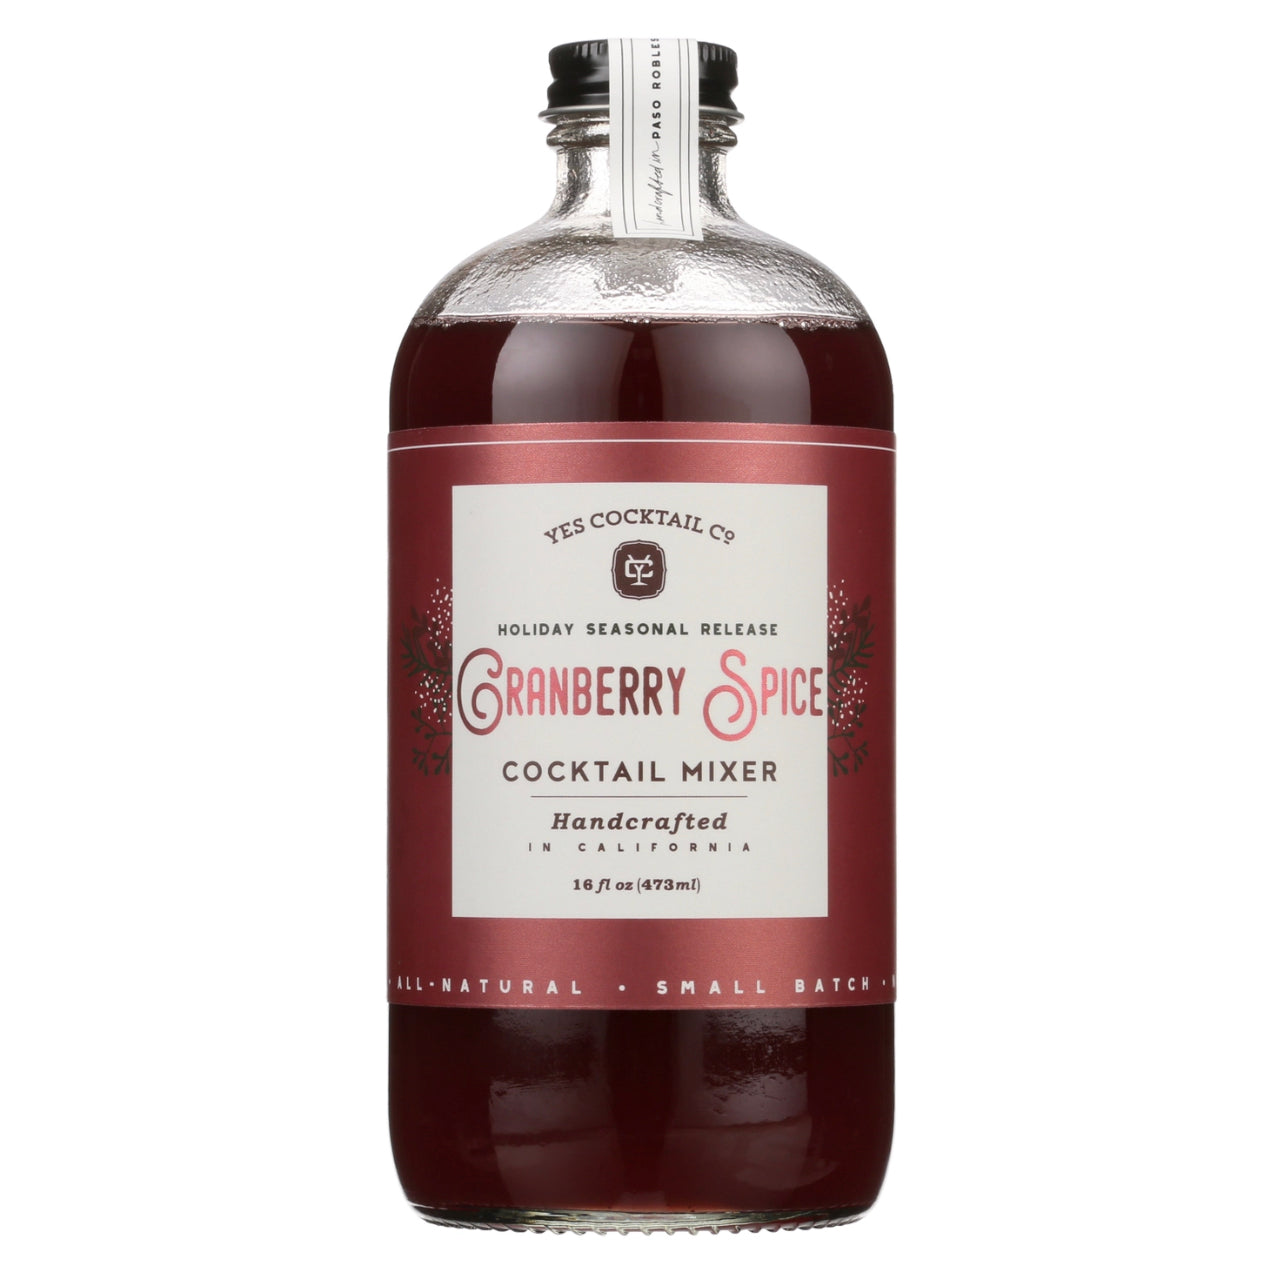 16 oz bottle of handcrafted Cranberry Spice Cocktail Mixer made by Yes Cocktail Co